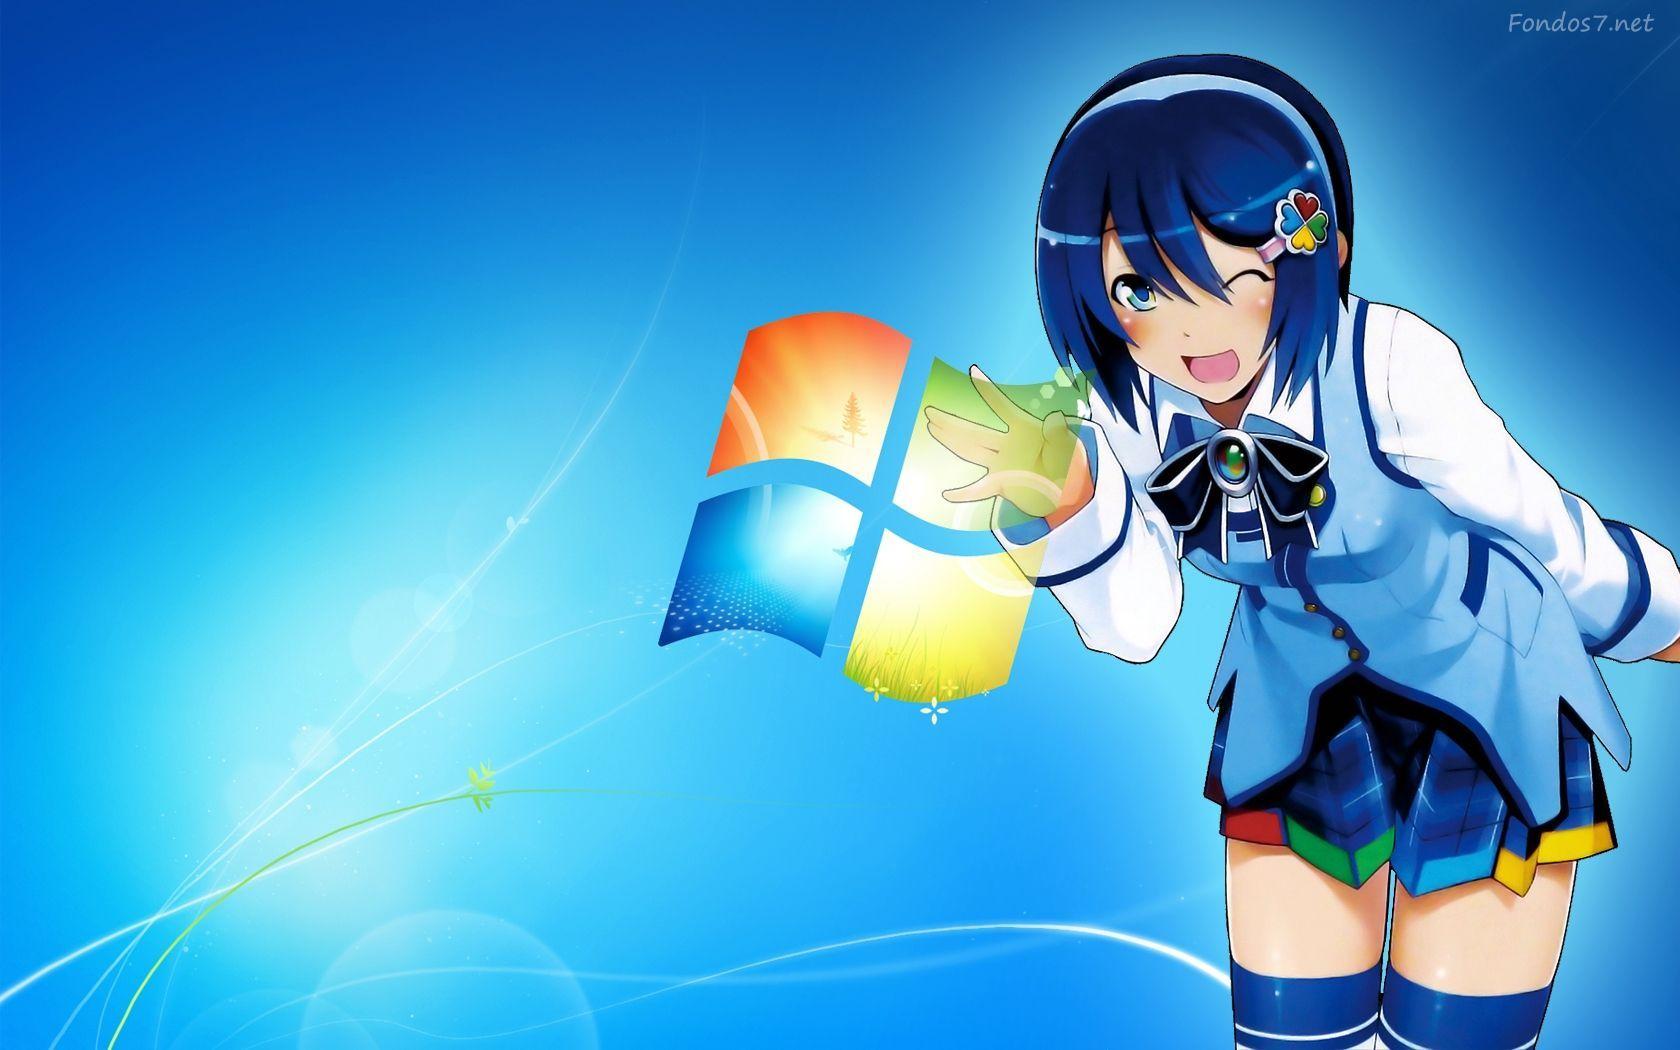 Windows Anime Wallpapers Top Free Windows Anime Backgrounds